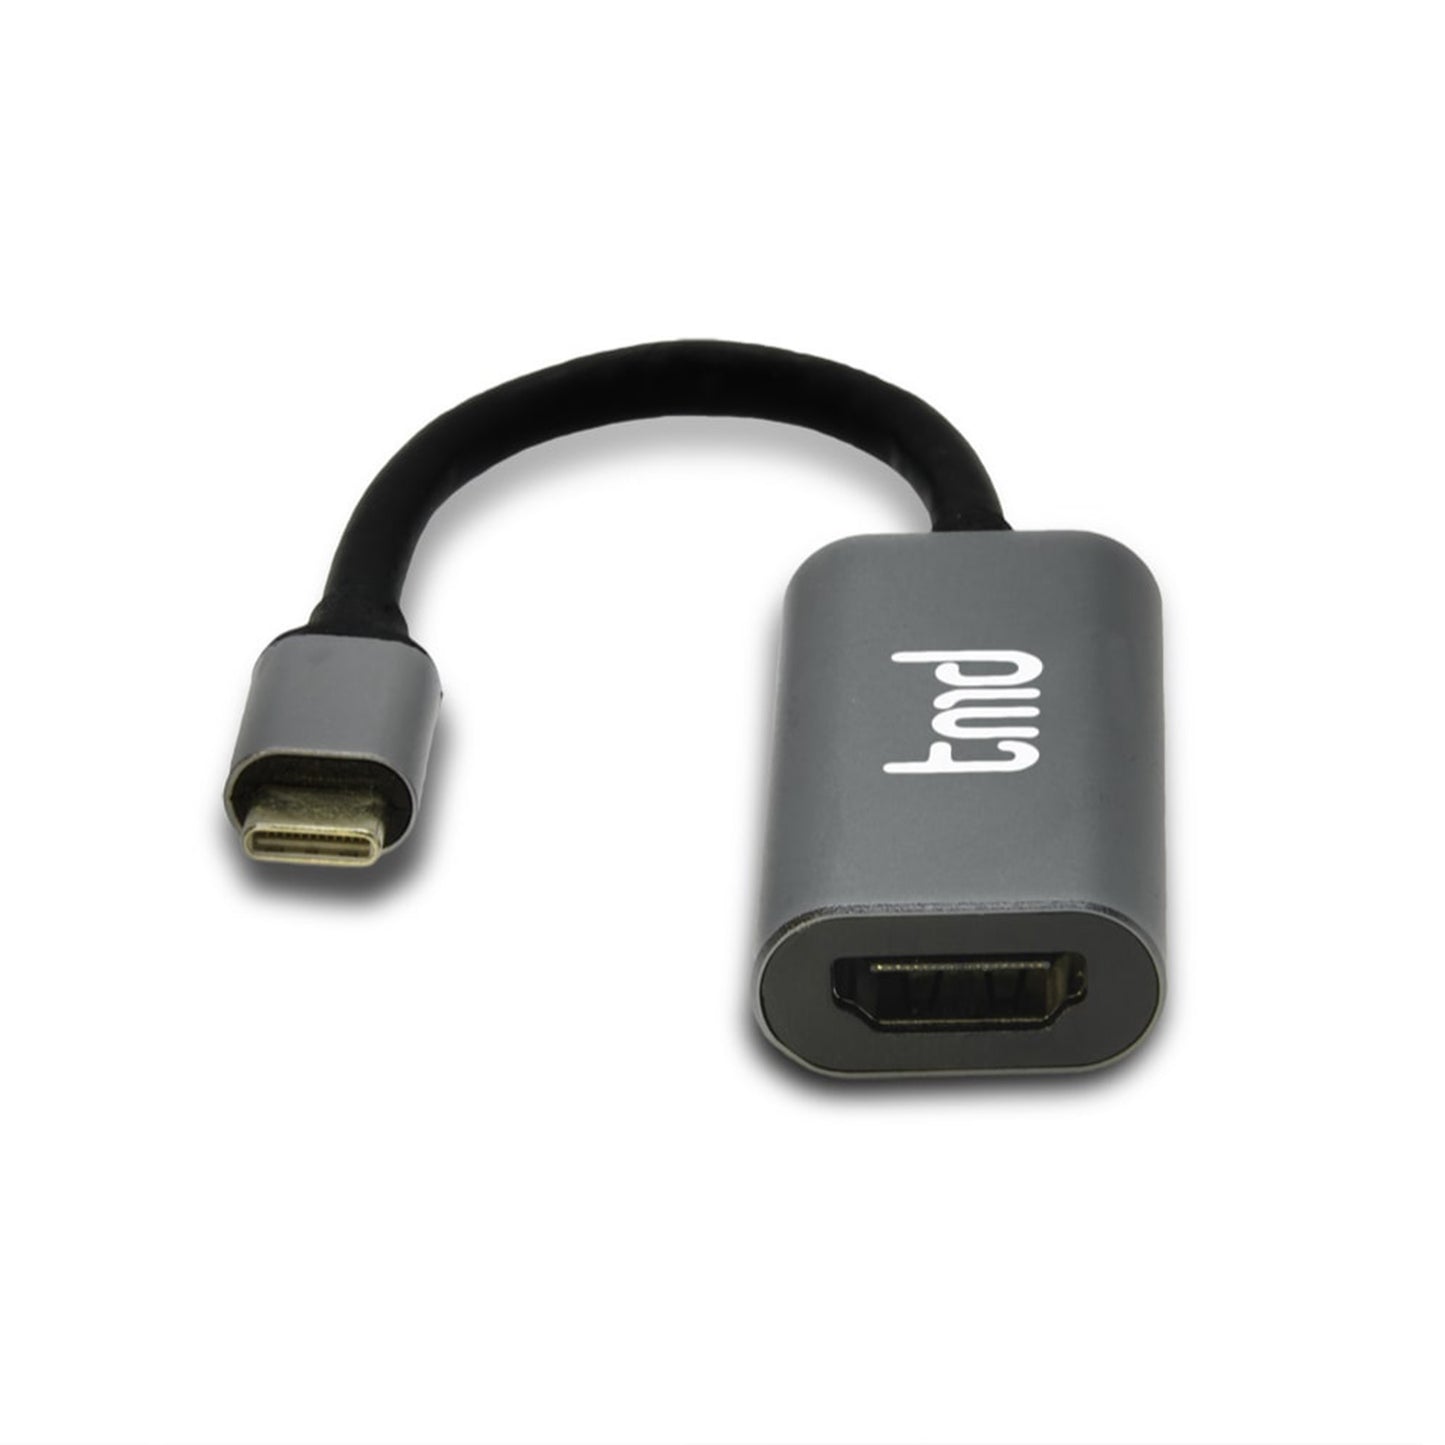 tmd USB-C to HDMI Adapter - Grey - 15-10486